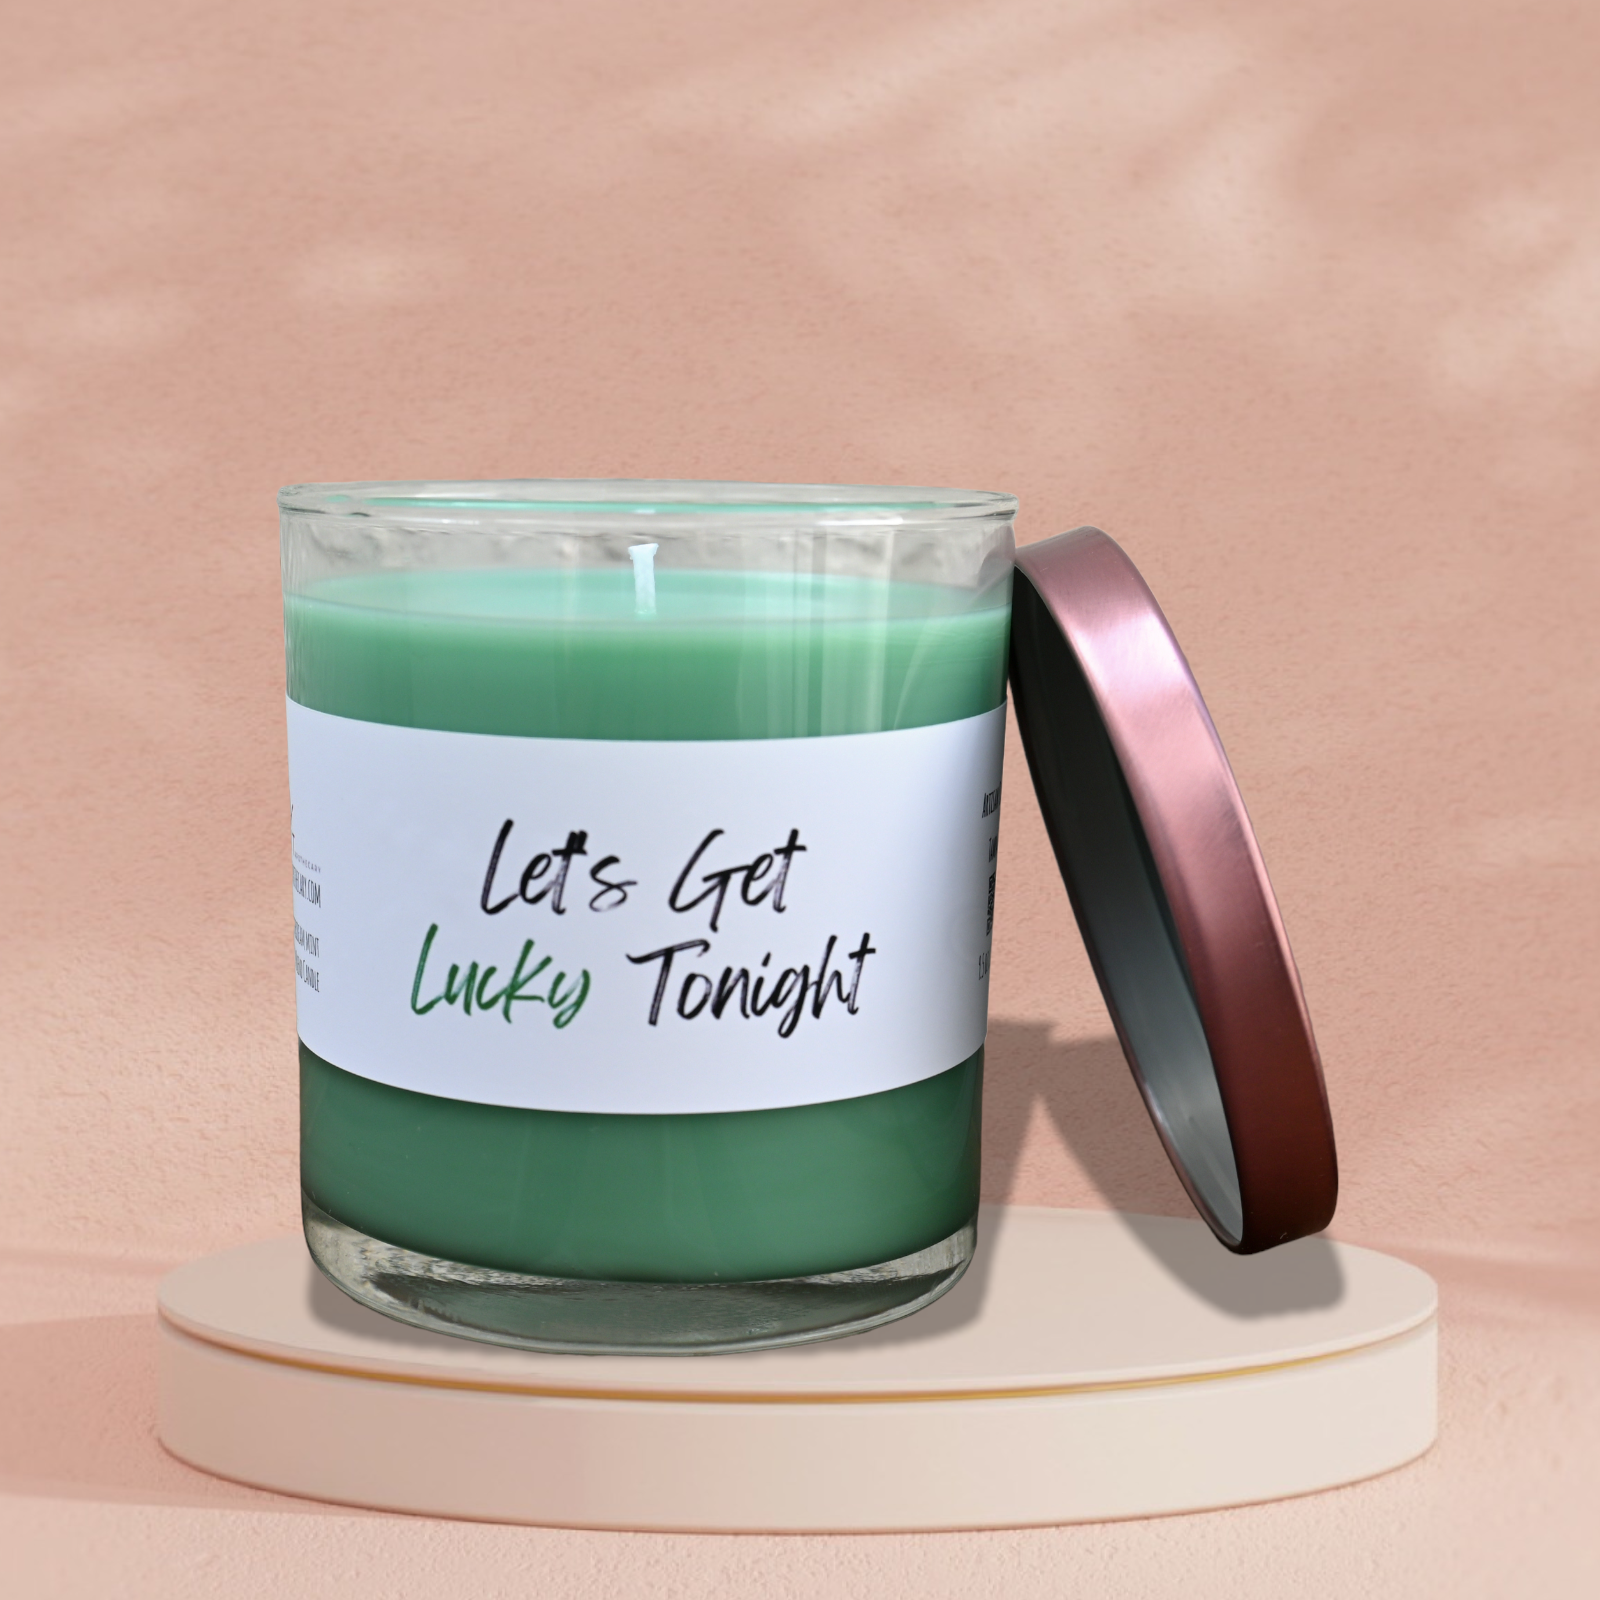 Let's Get Lucky Tonight Candle - Buttercream Mint Candle